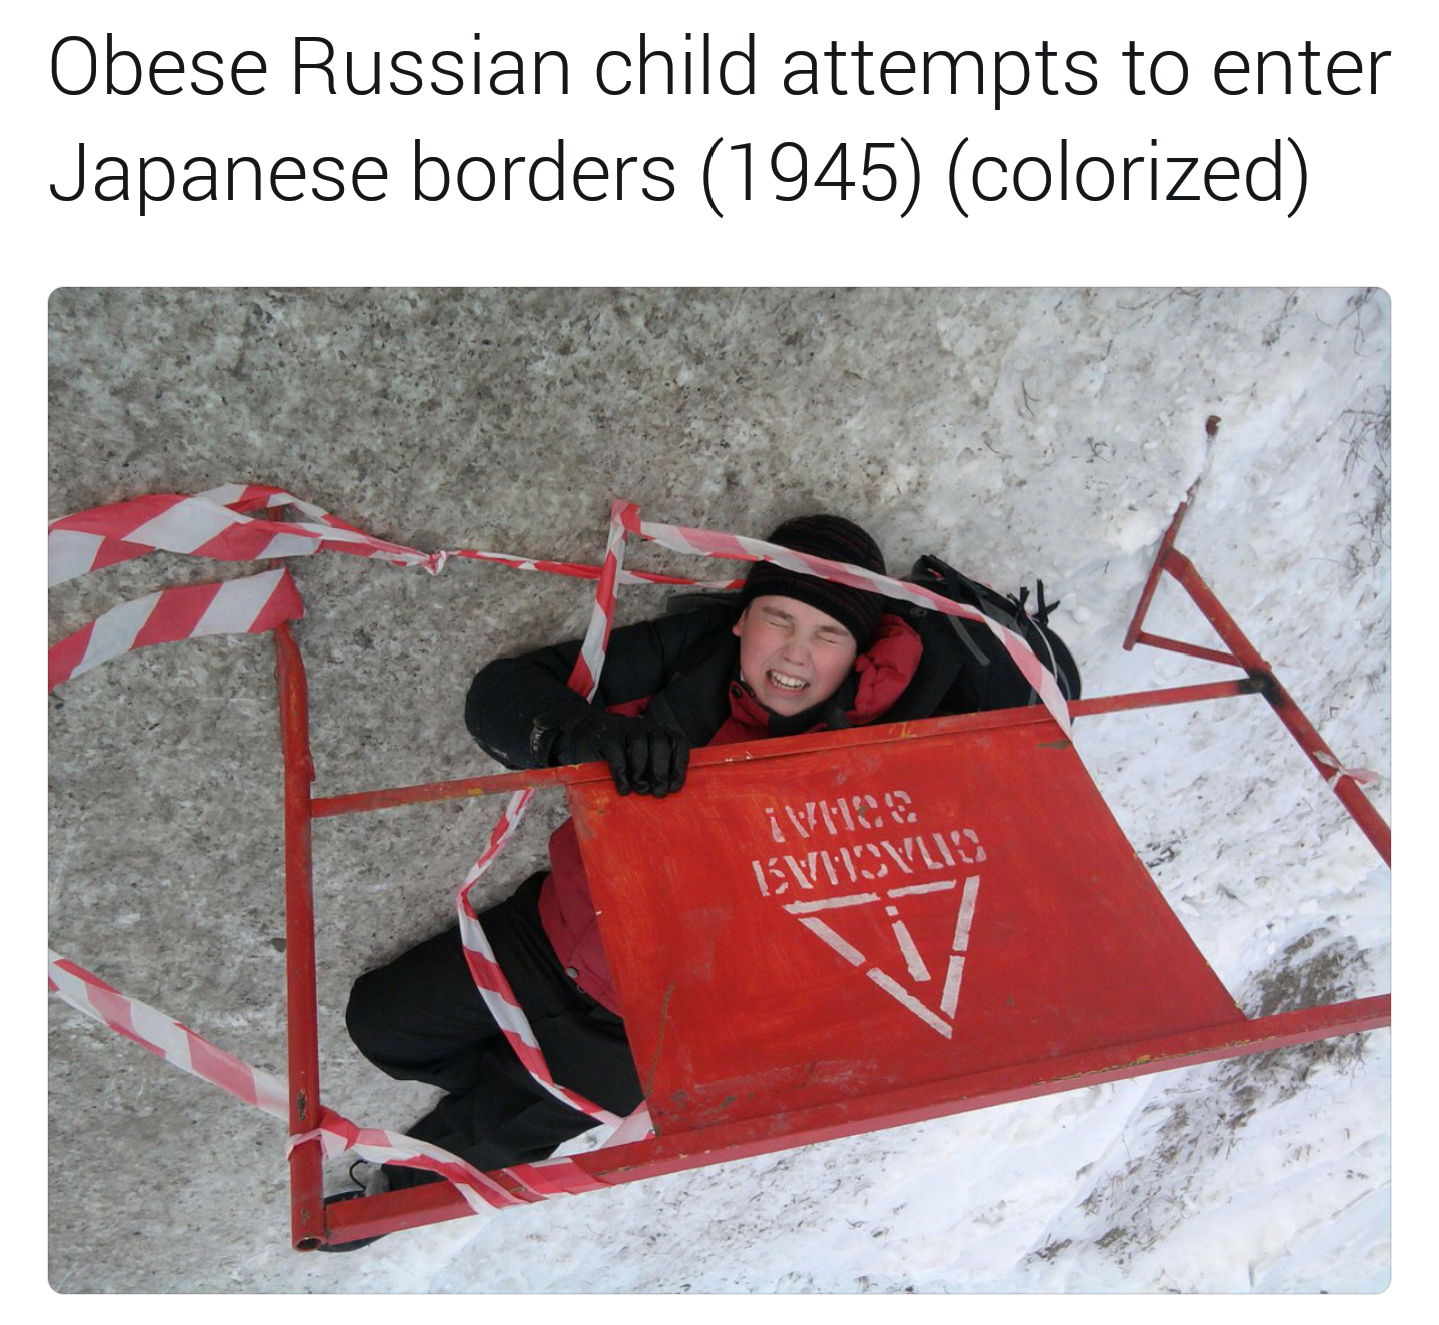 angle - Obese Russian child attempts to enter Japanese borders 1945 colorized iVe Eisvus